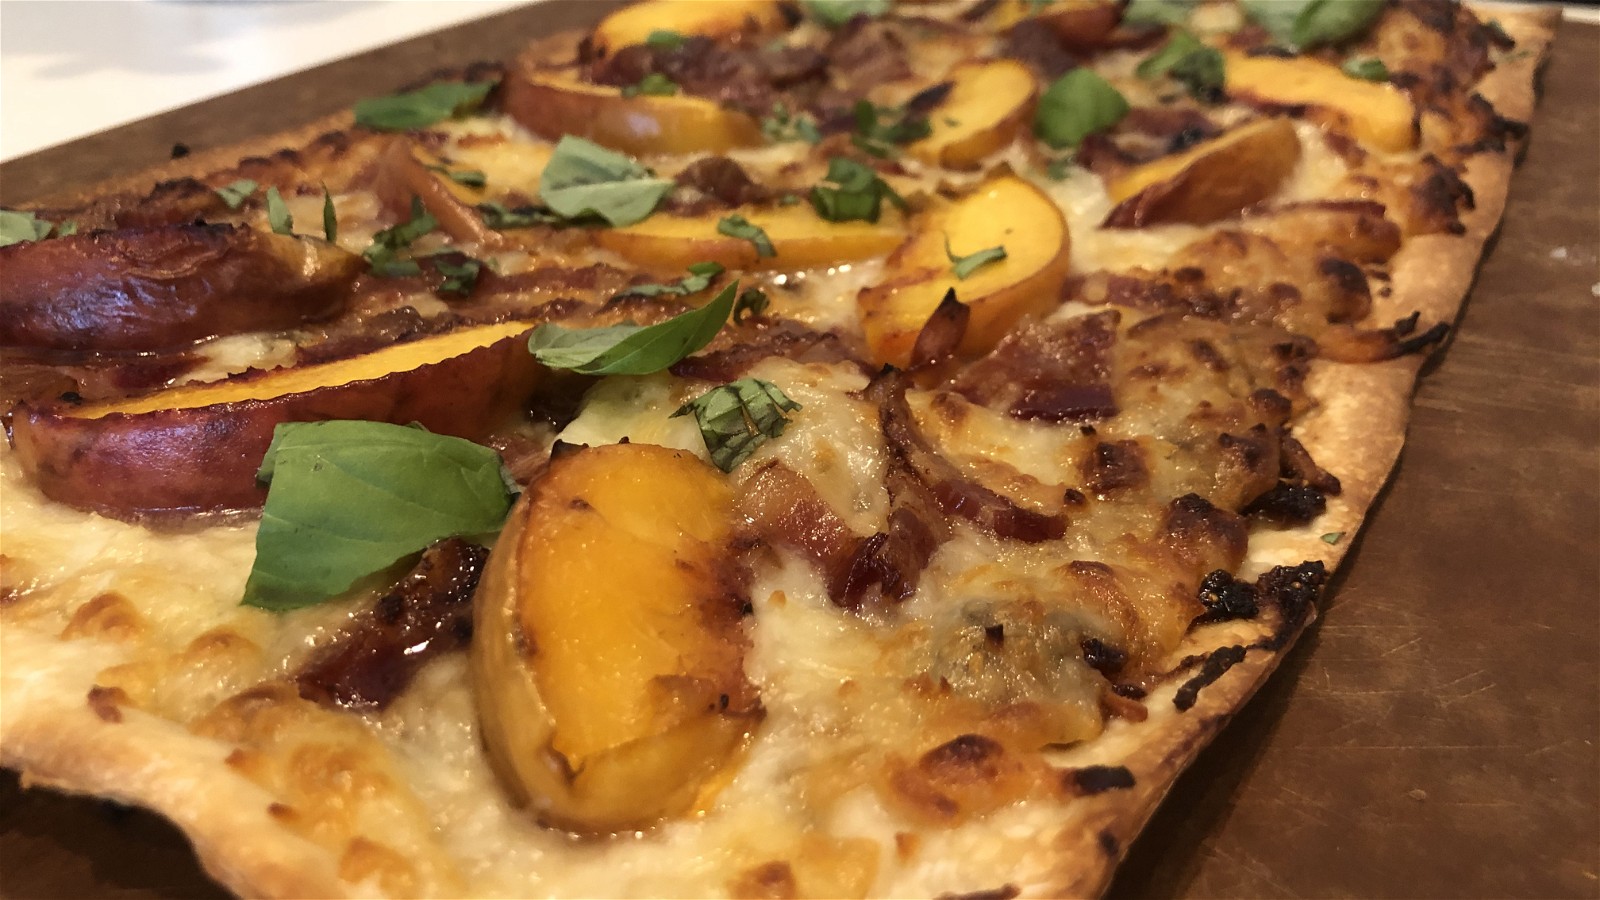 Image of Grilled Peach Flatbread